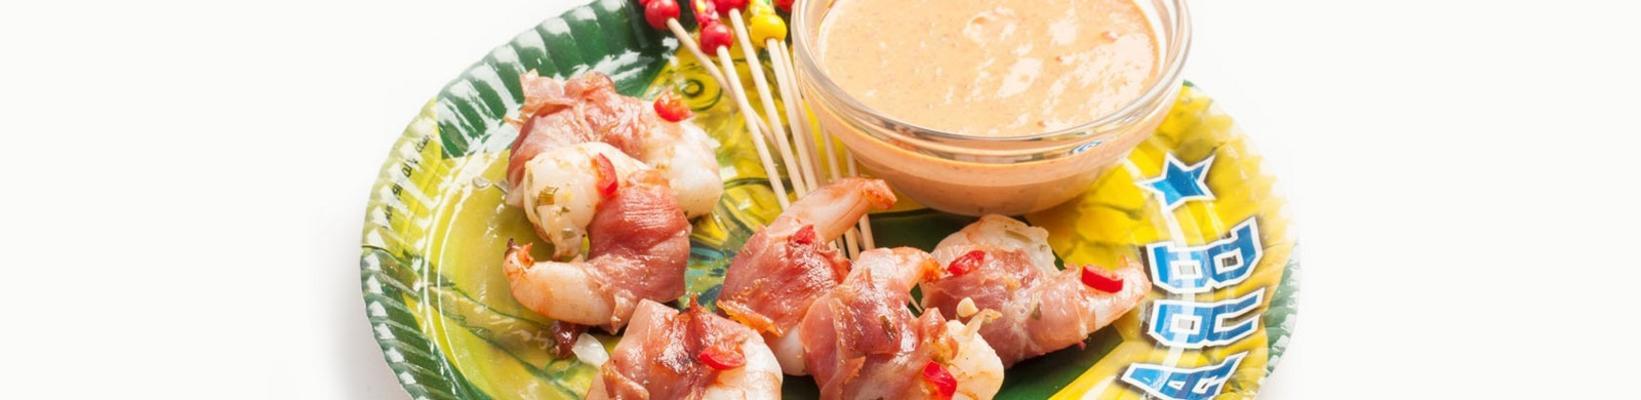 grilled shrimps with roasted red pepper aioli